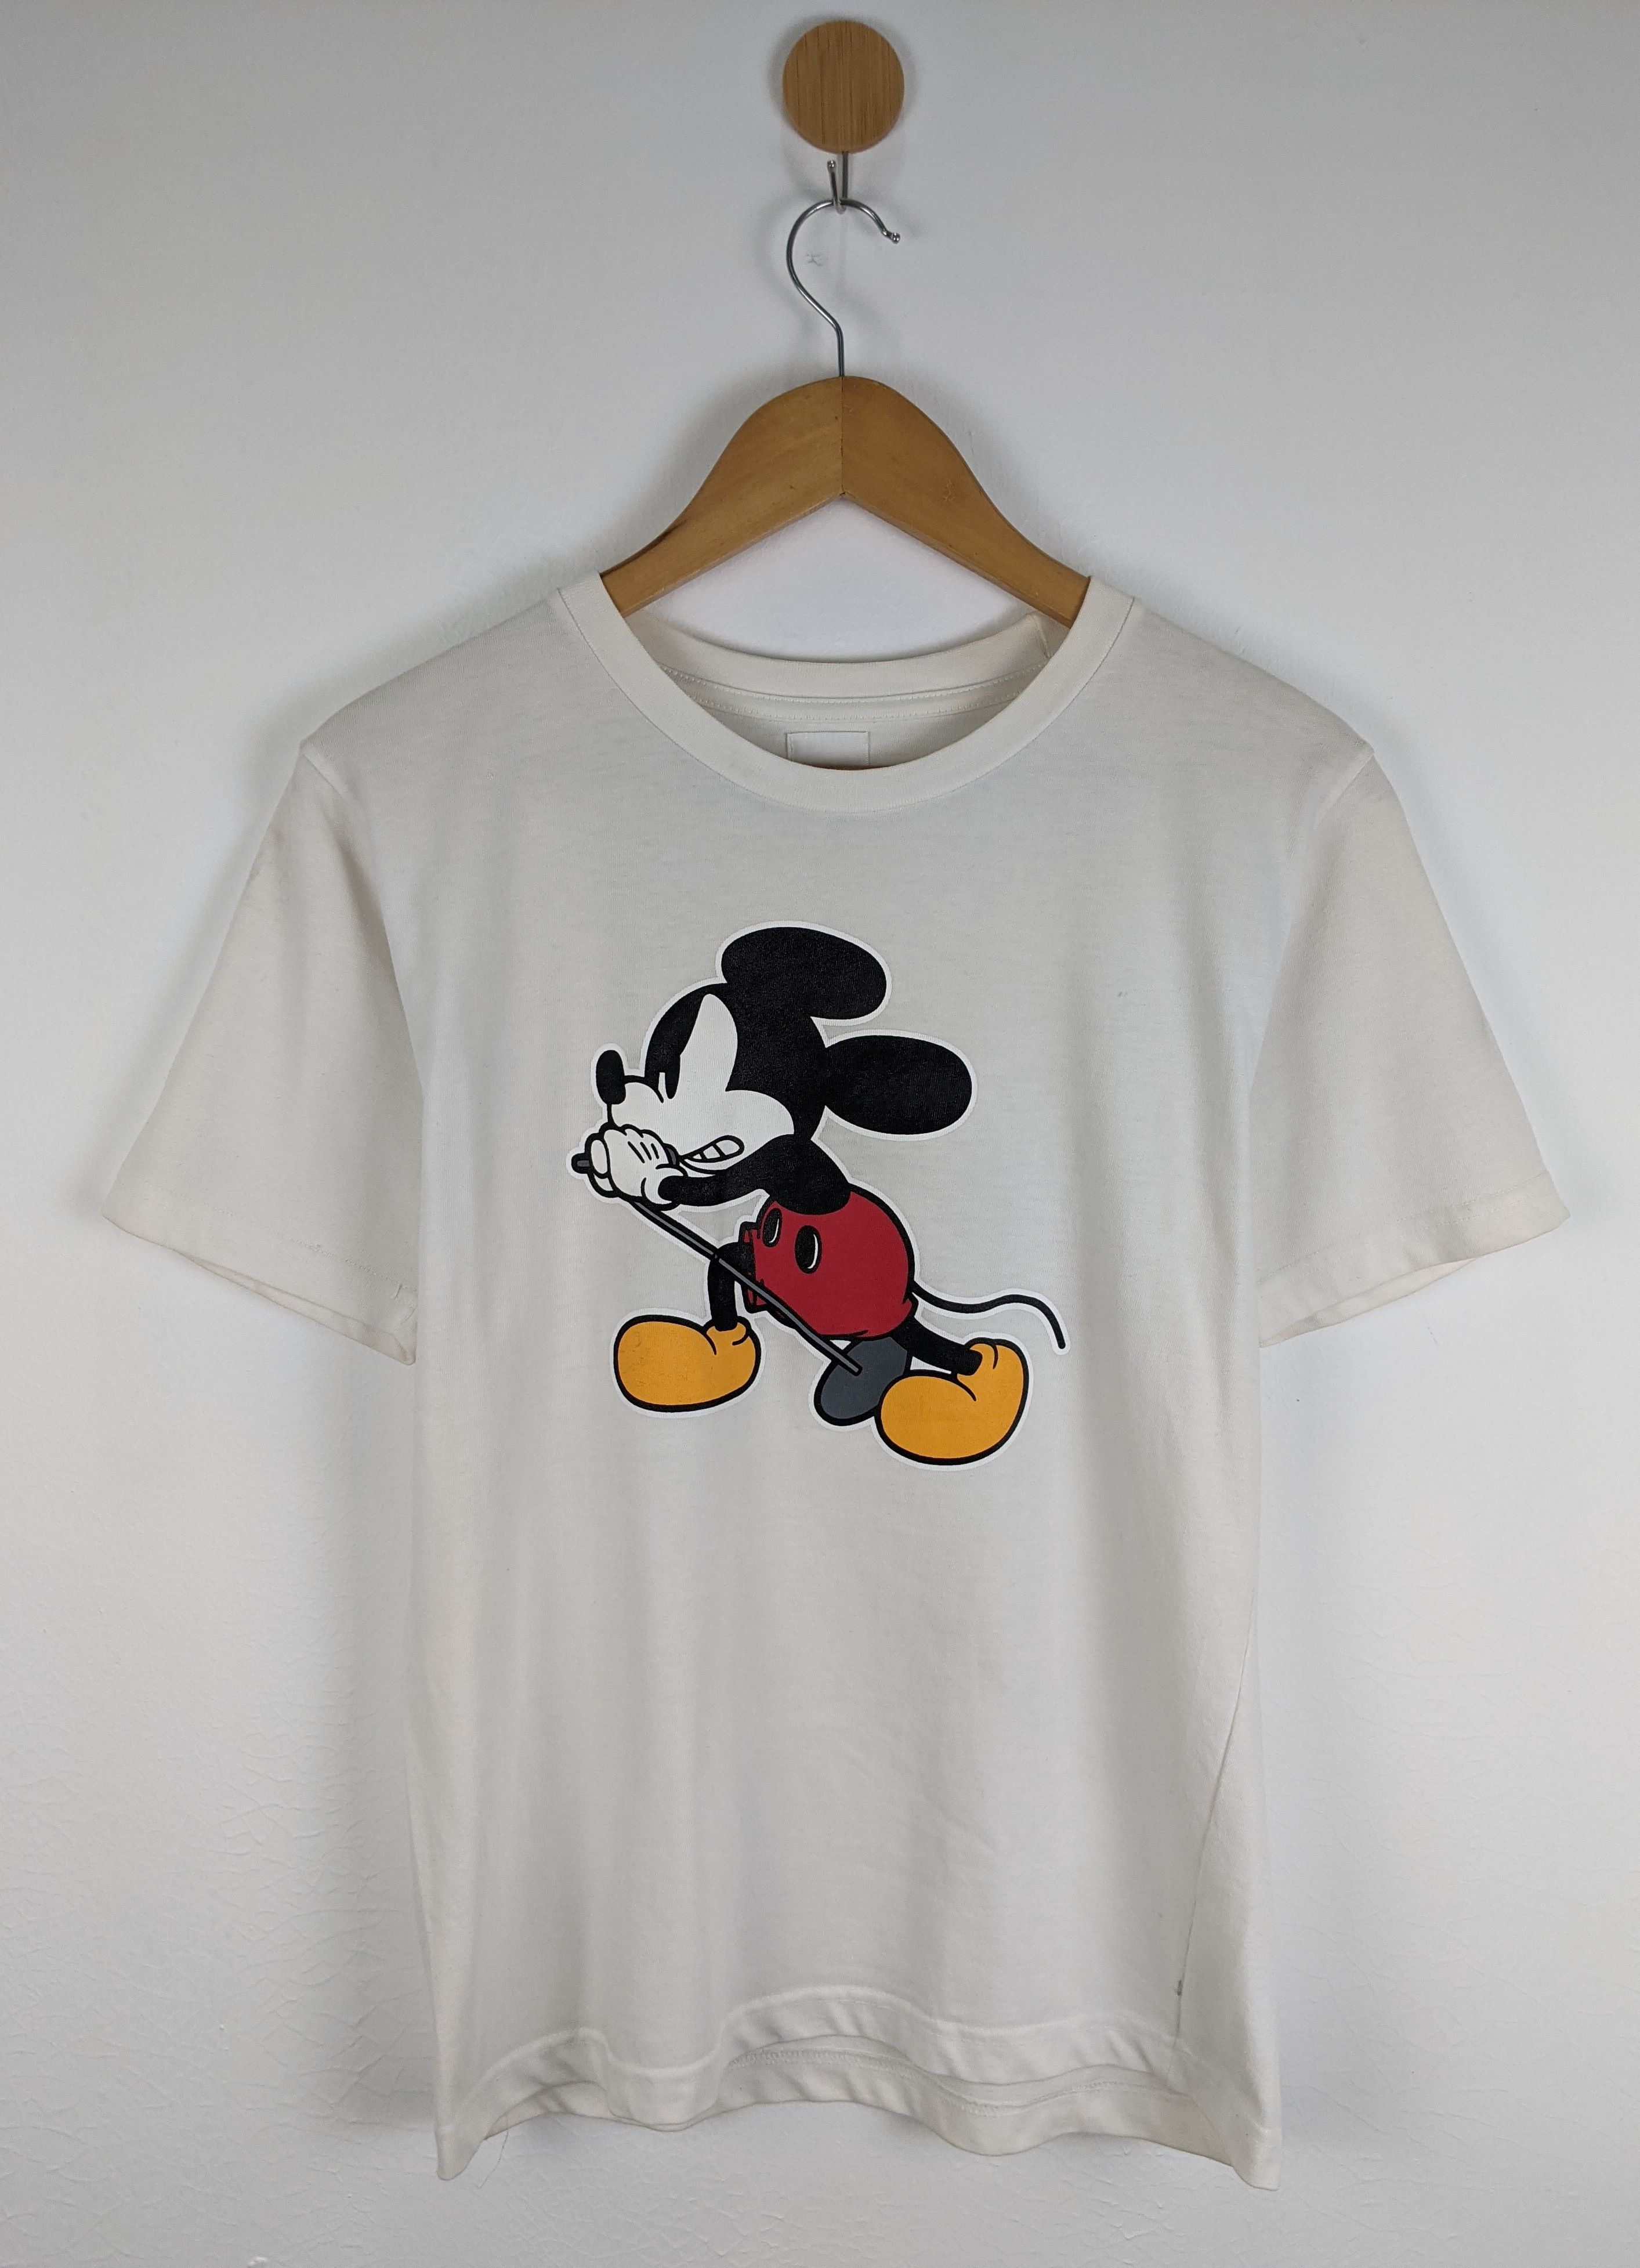 Numbernine x Mickey Mouse shirt - 1